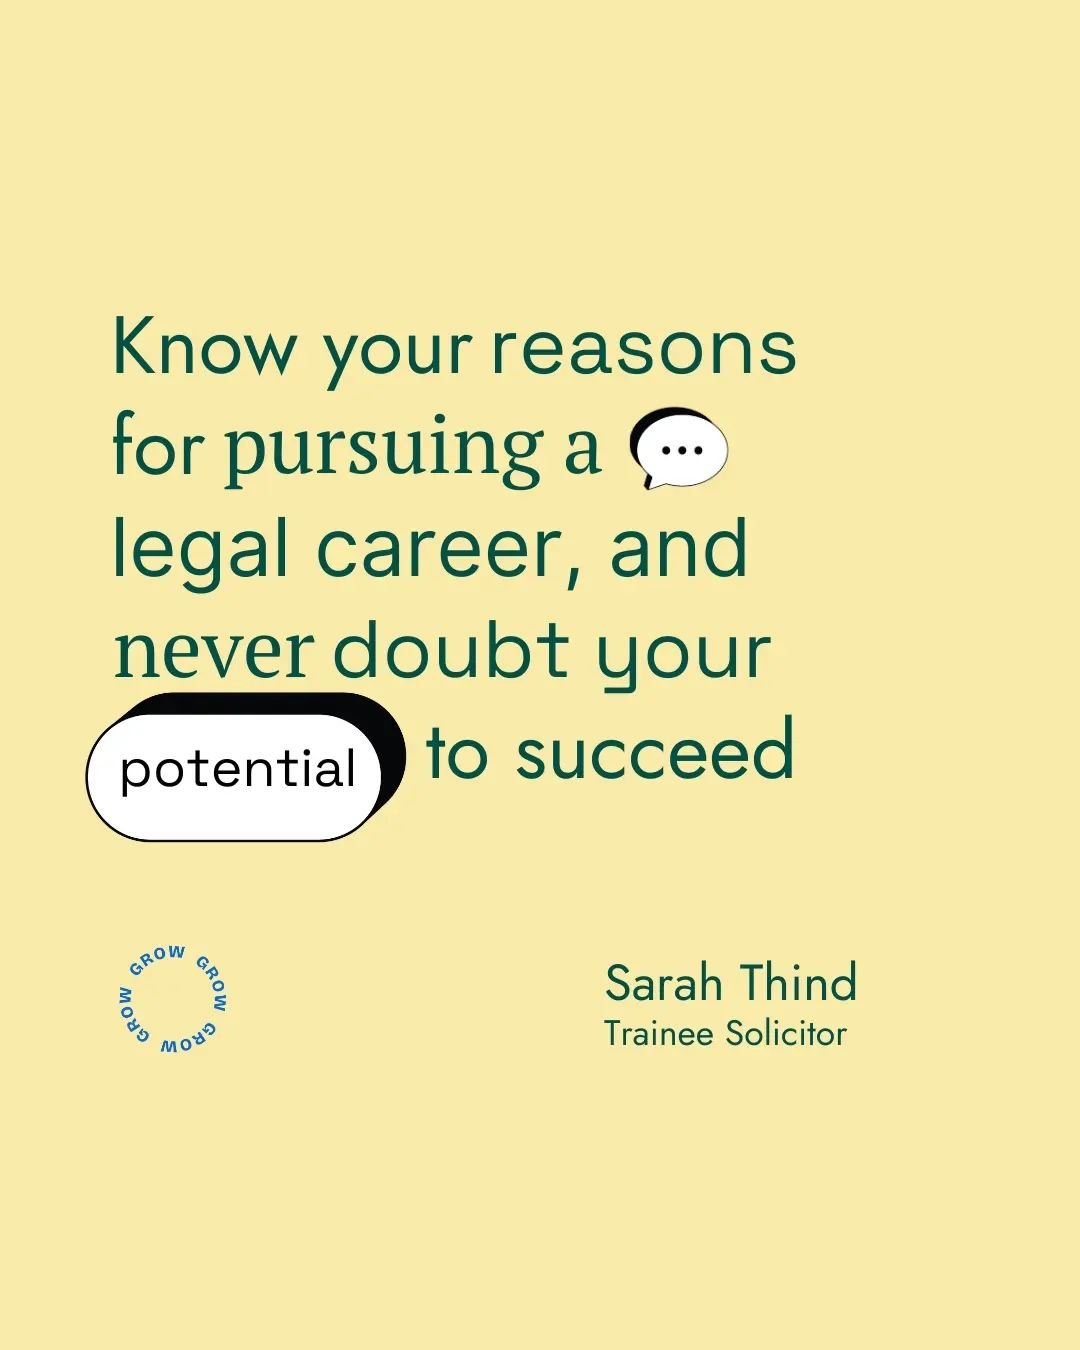 Never doubt yourself 🤝

Sarah Thind, a trainee solicitor, reminds all aspiring lawyers to remember why you started the journey to become a lawyer.

Staying persistent and positive throughout the process, while believing in your potential, will bring